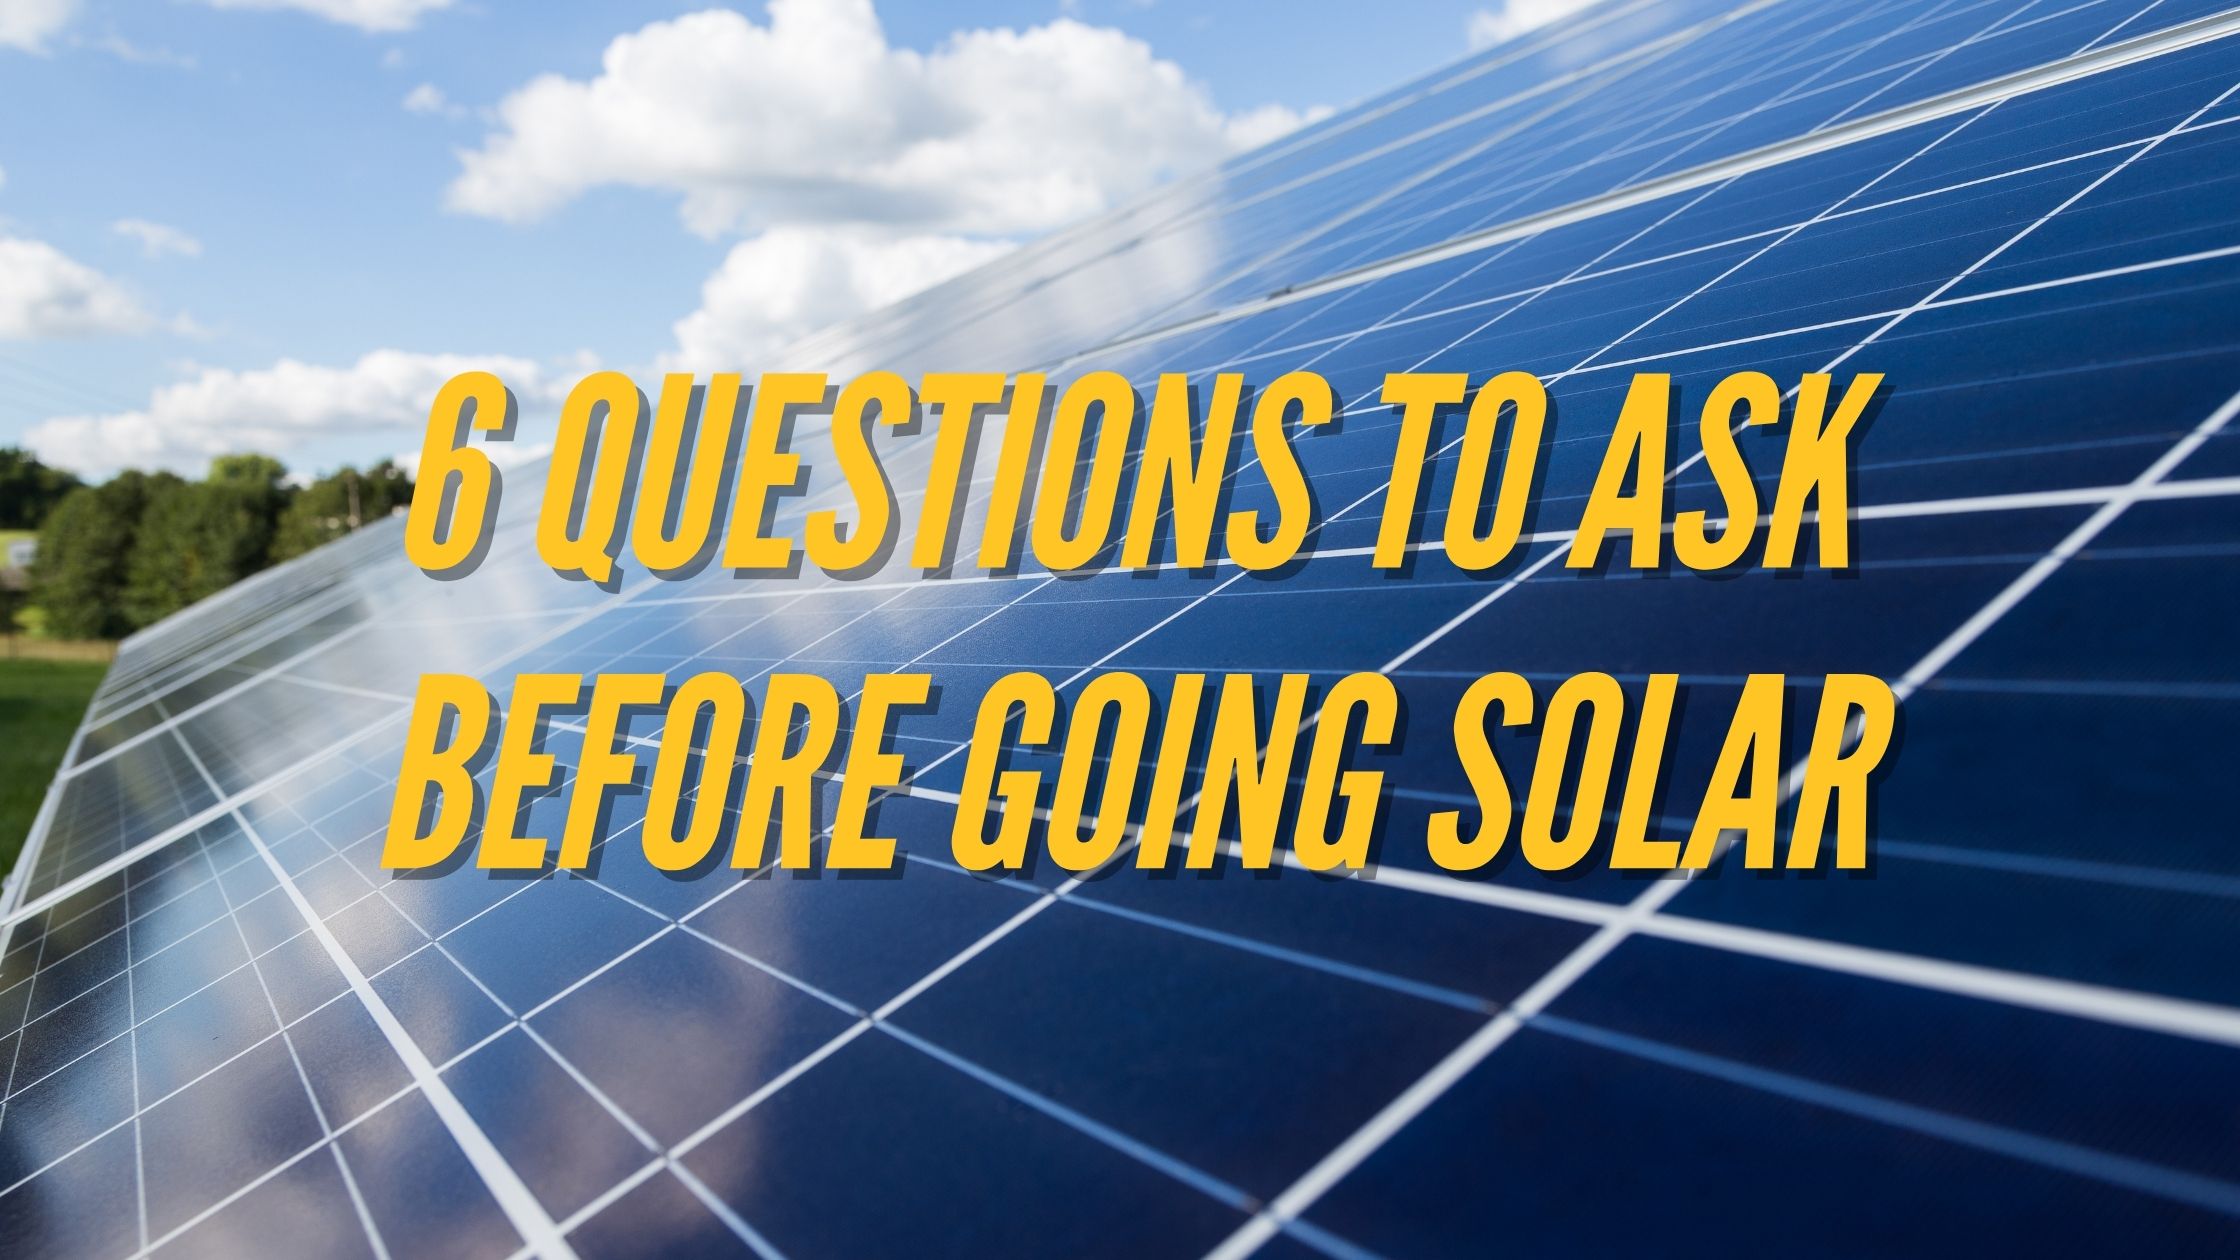 6 Questions to Ask Before Going Solar